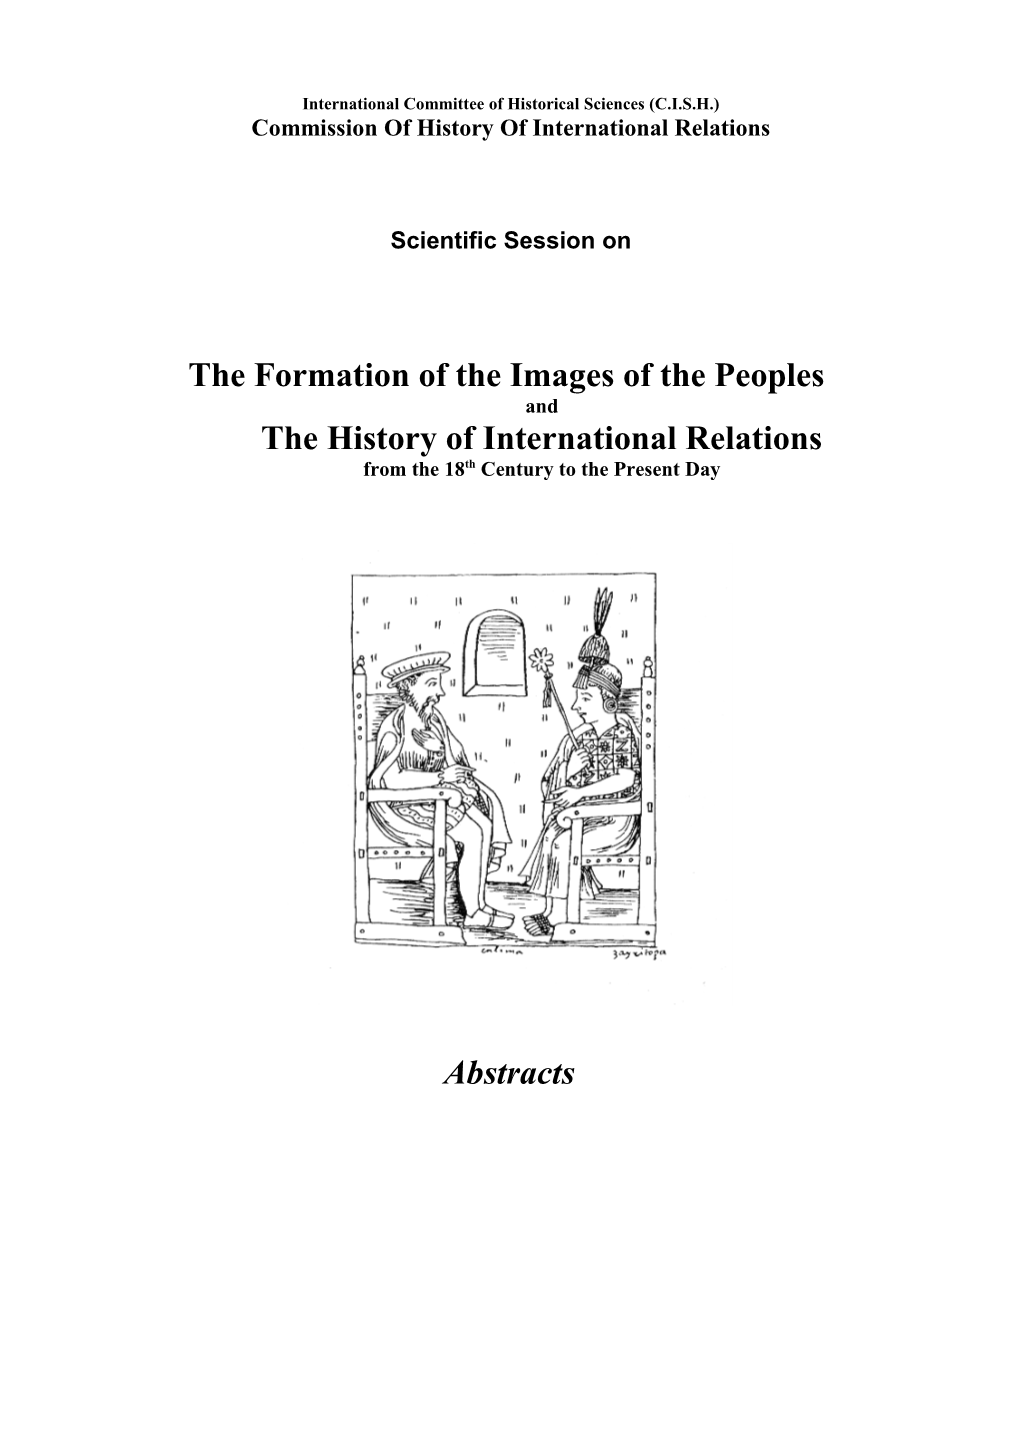 The Images of the Peoples and the History of International Relations